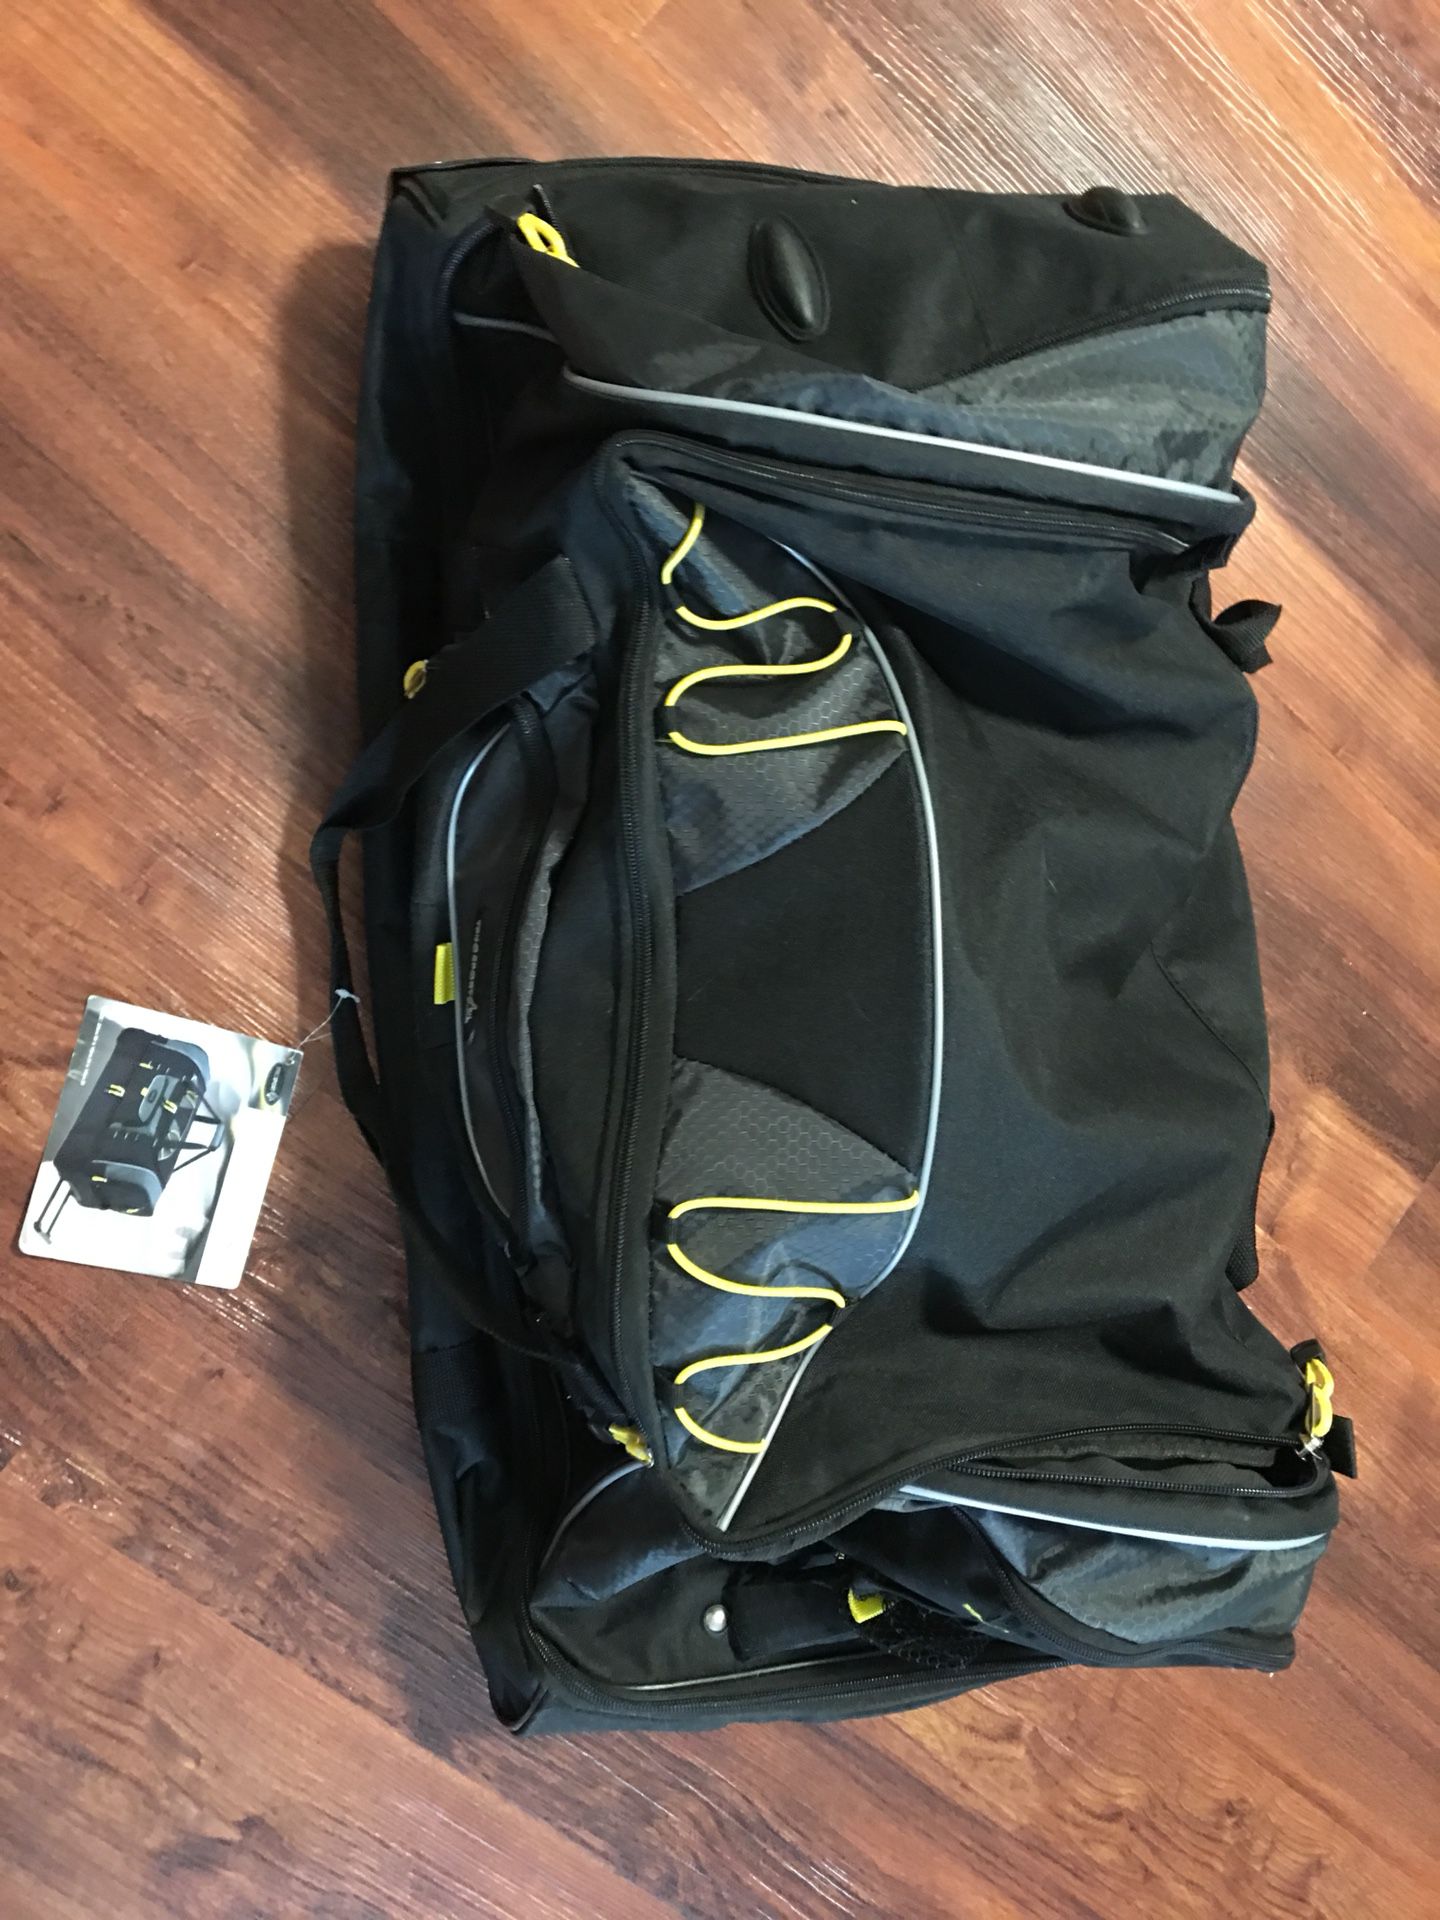 TPRC SPORT 30. In 2-Section Rolling Duffel (MOVING SALE 50%OFF)